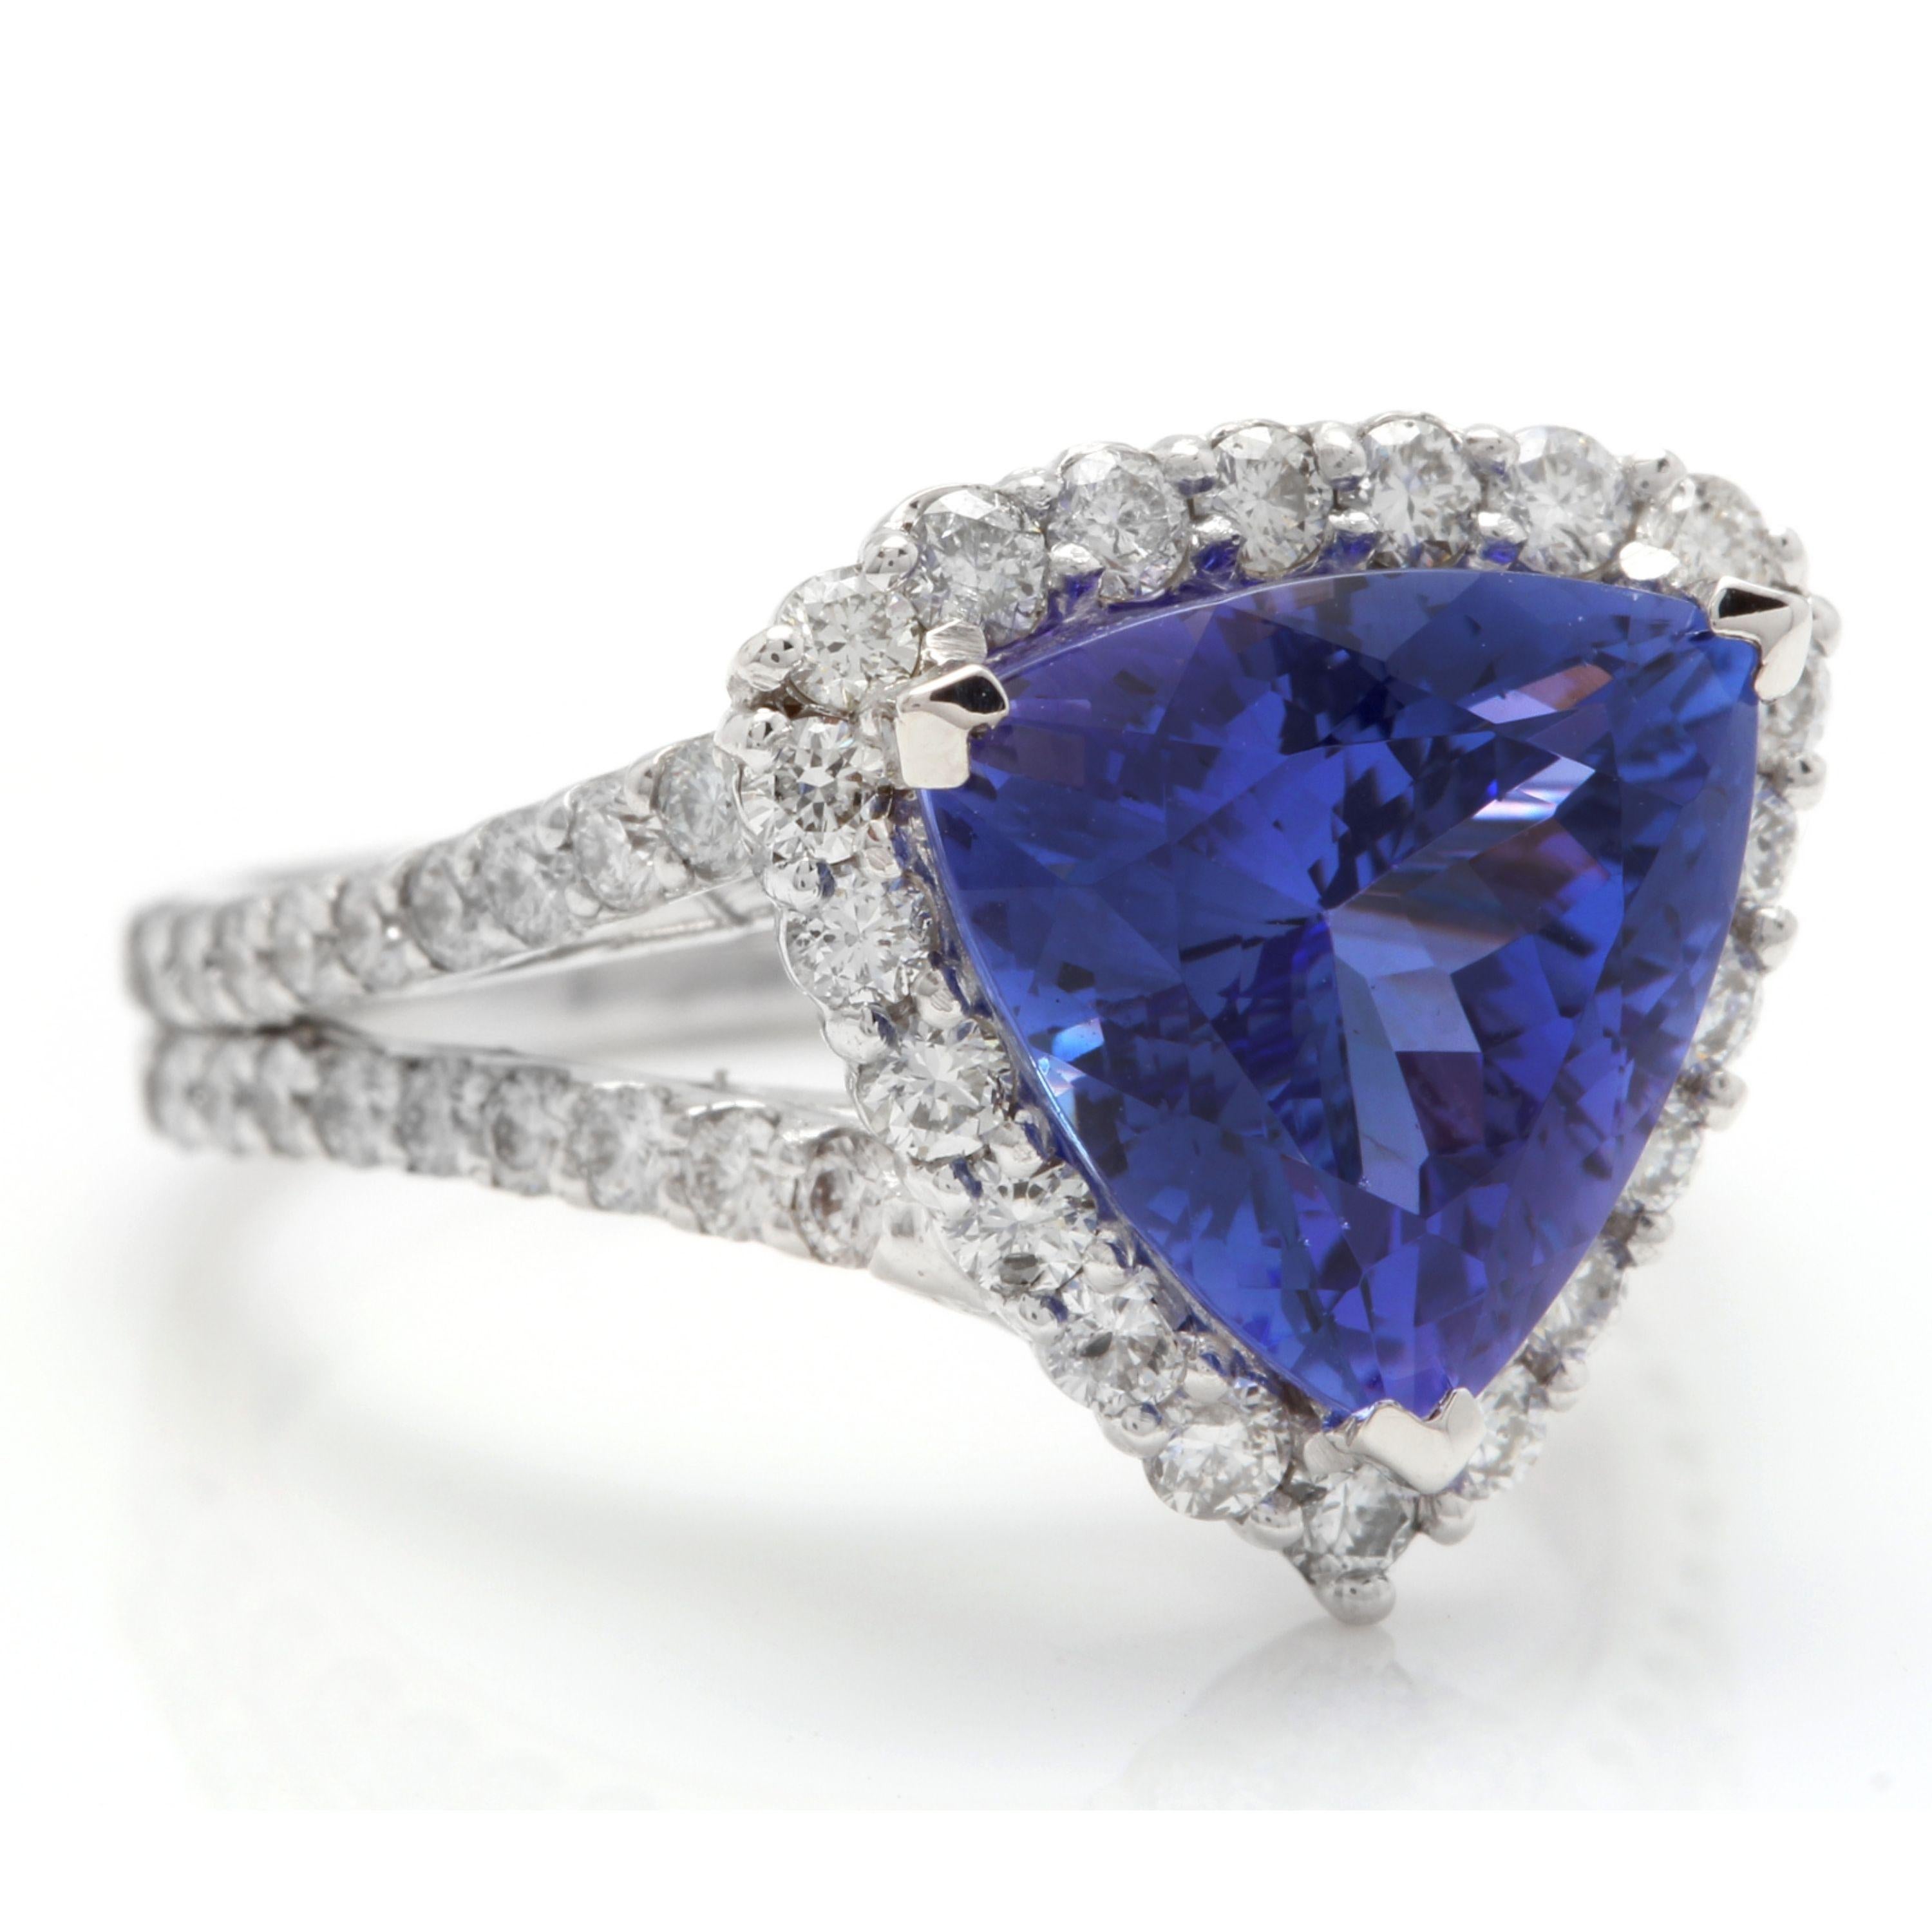 5.00 Carats Natural Very Nice Looking Tanzanite and Diamond 14K Solid White Gold Ring

Total Natural Trillion Cut Tanzanite Weight is: Approx. 4.00 Carats

Tanzanite Measures: Approx. 10.60 x 10.15mm

Natural Round Diamonds Weight: Approx. 1.00